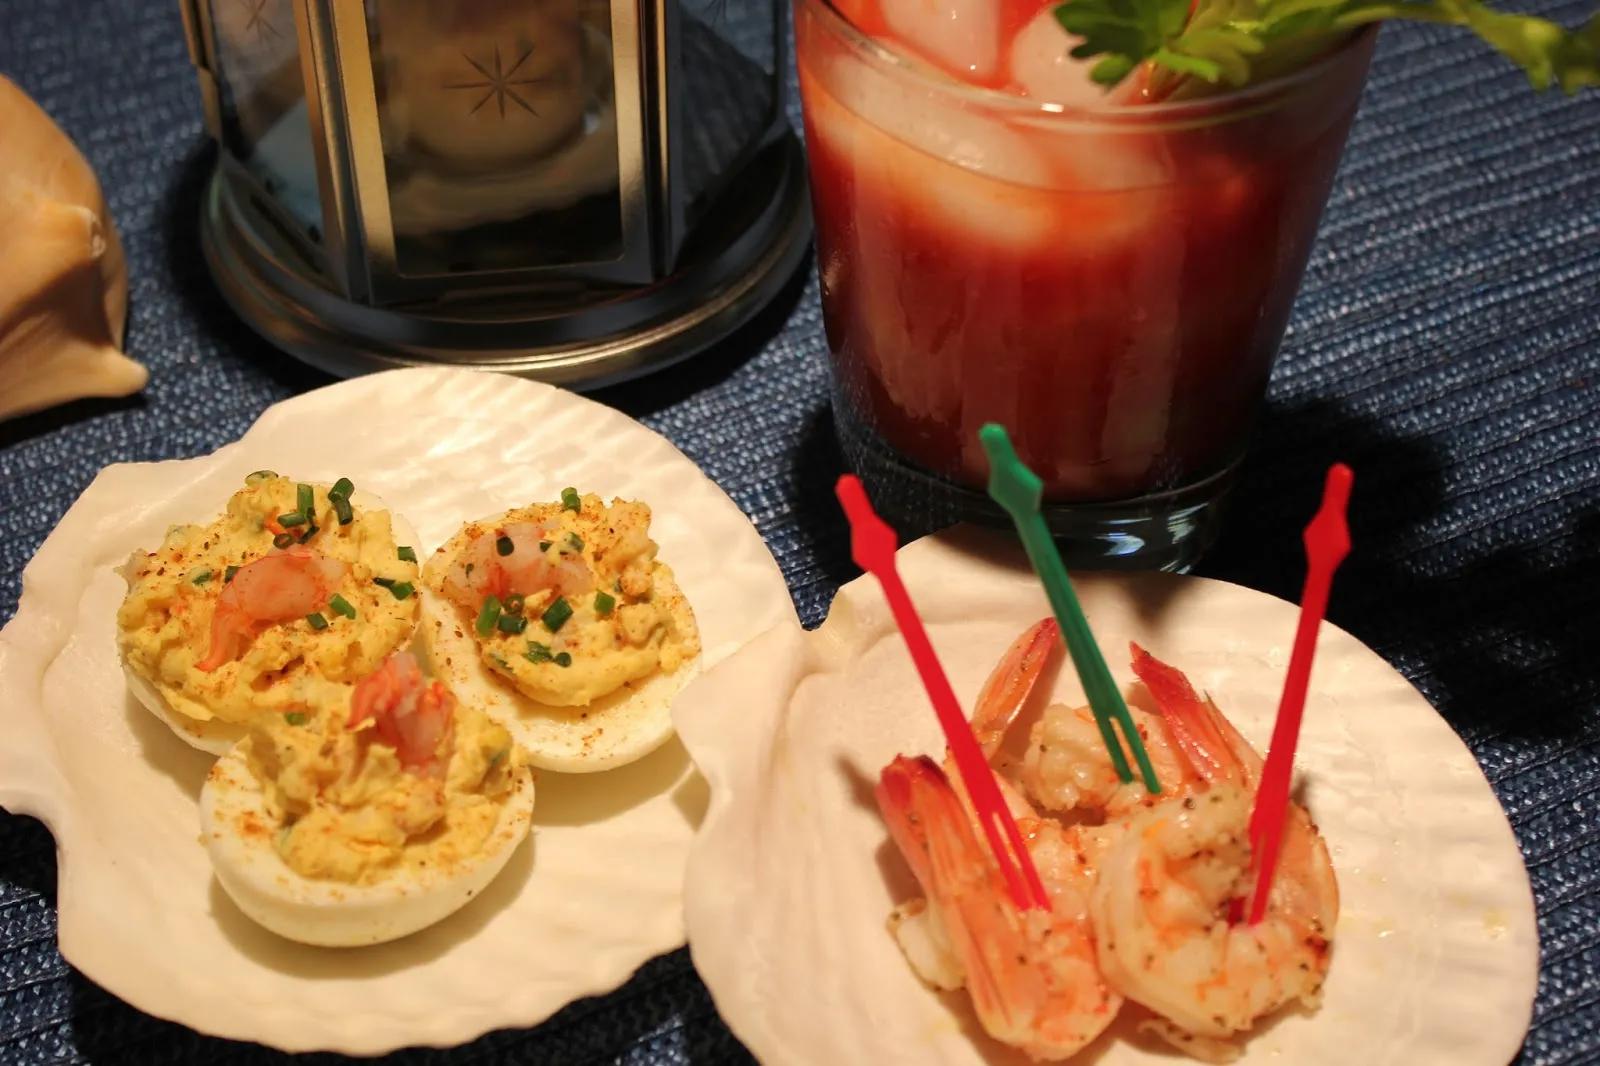 Carolina Foodie: IN A PICKLE, WITH SHRIMP